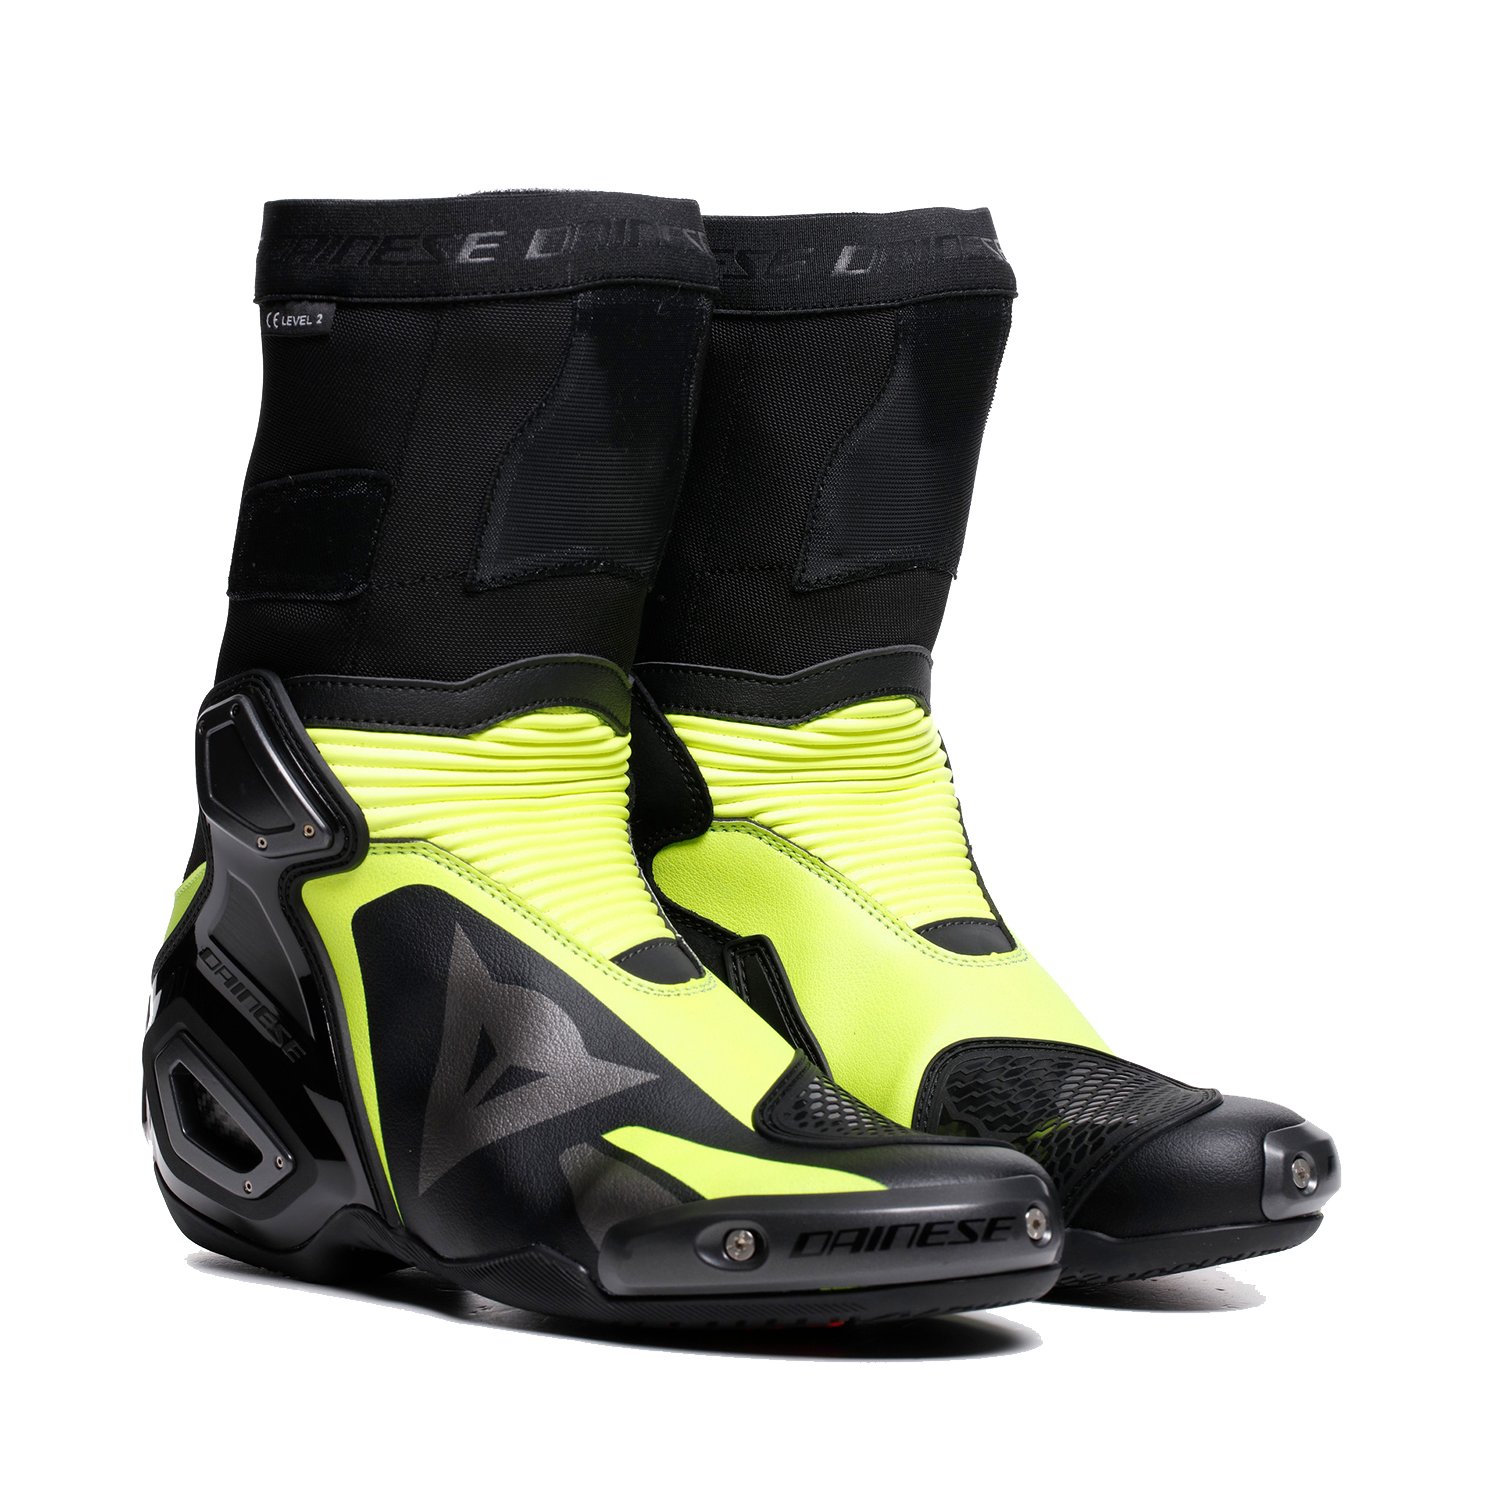 Image of Dainese Axial 2 Boots Black Yellow Fluo Talla 43